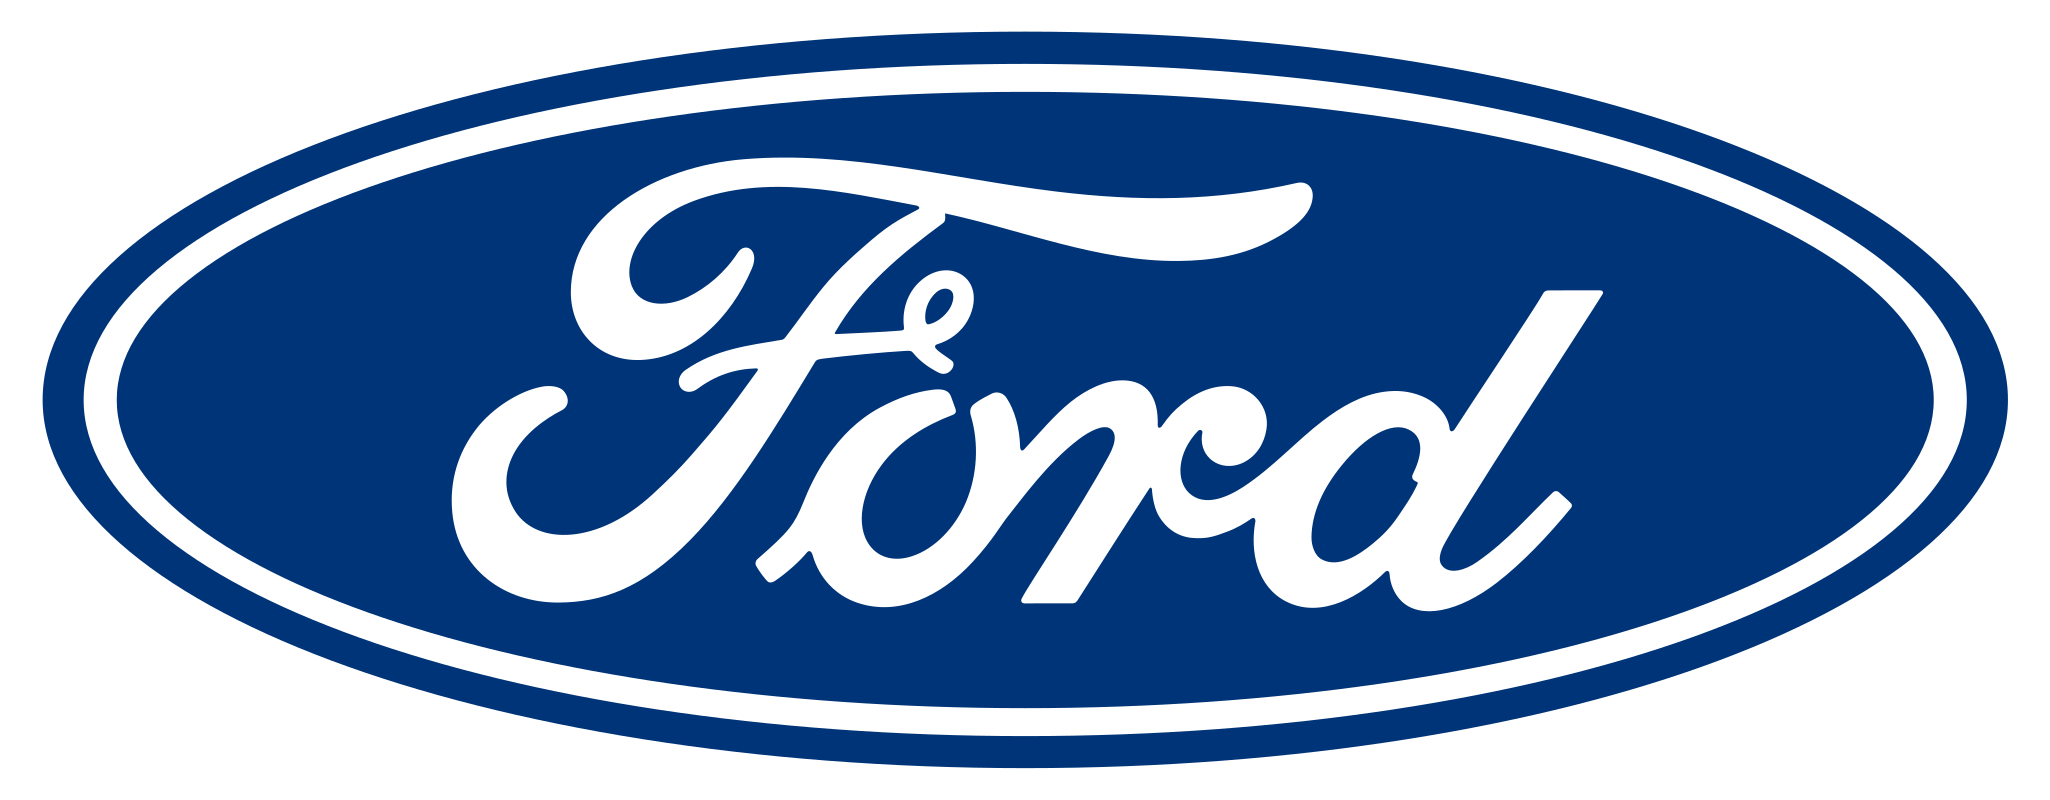 Ford Logo Vector Png